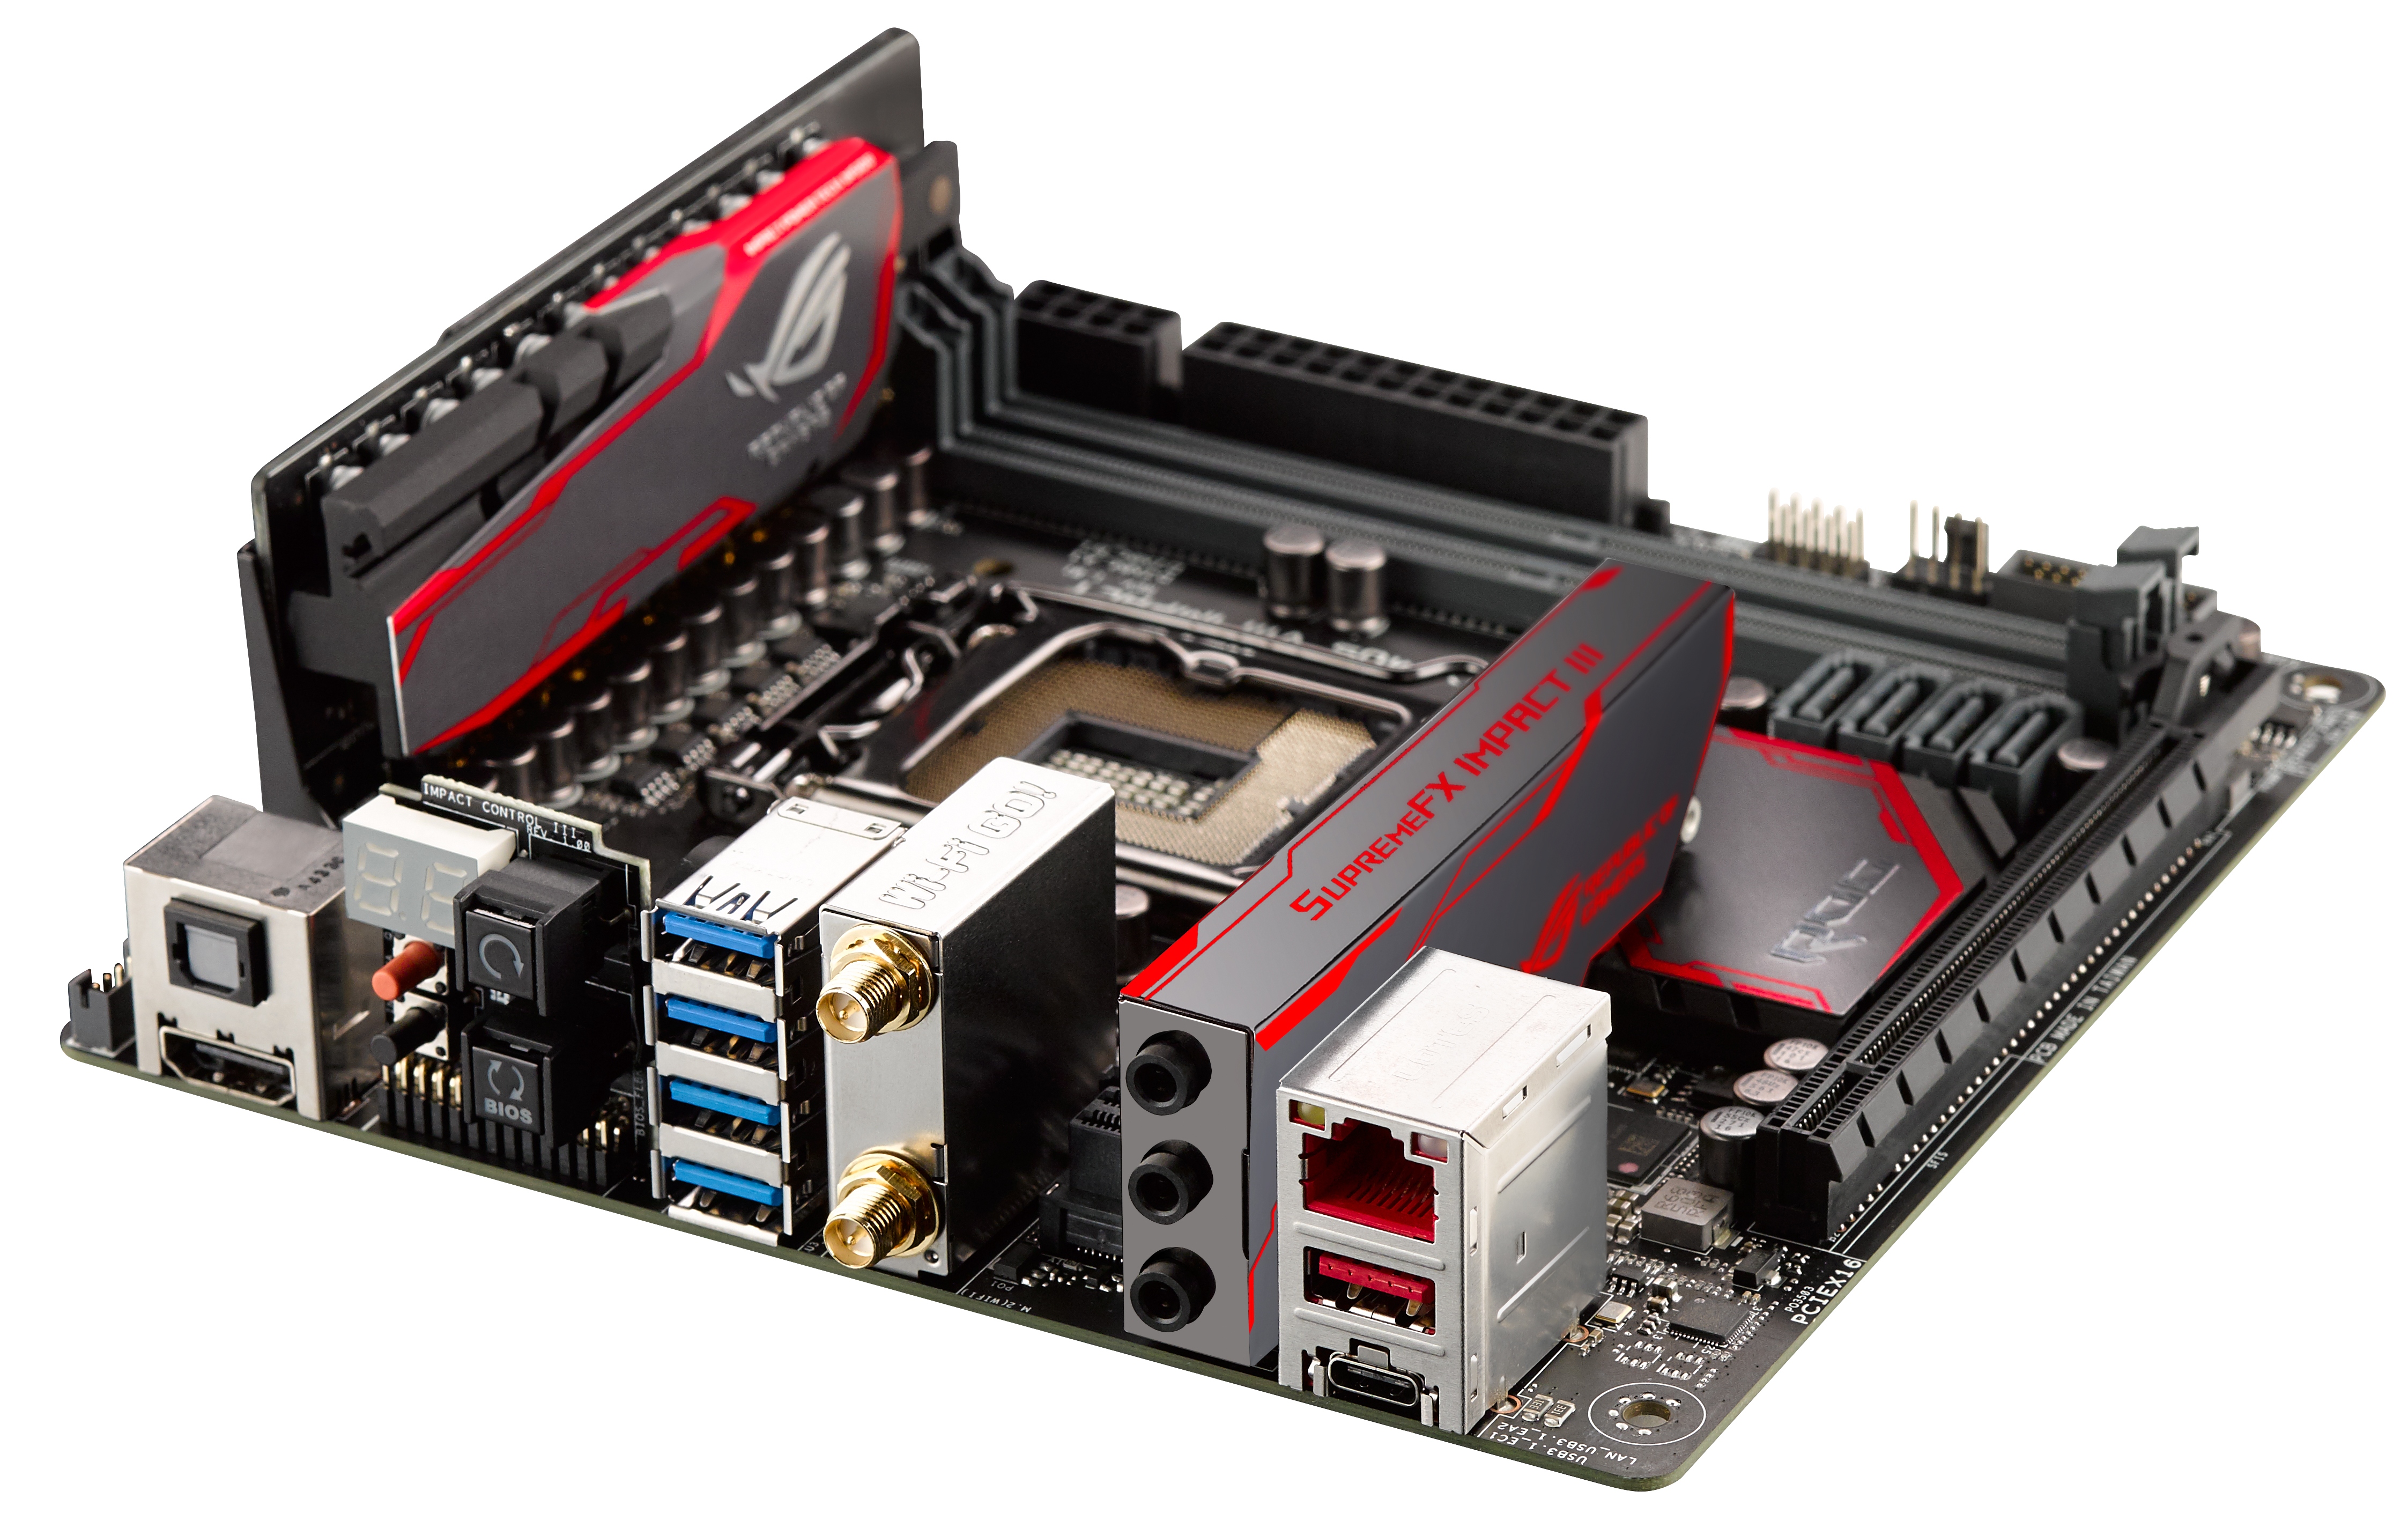 The ASUS Maximus VIII Impact Z170 ROG Mini-ITX Motherboard Review